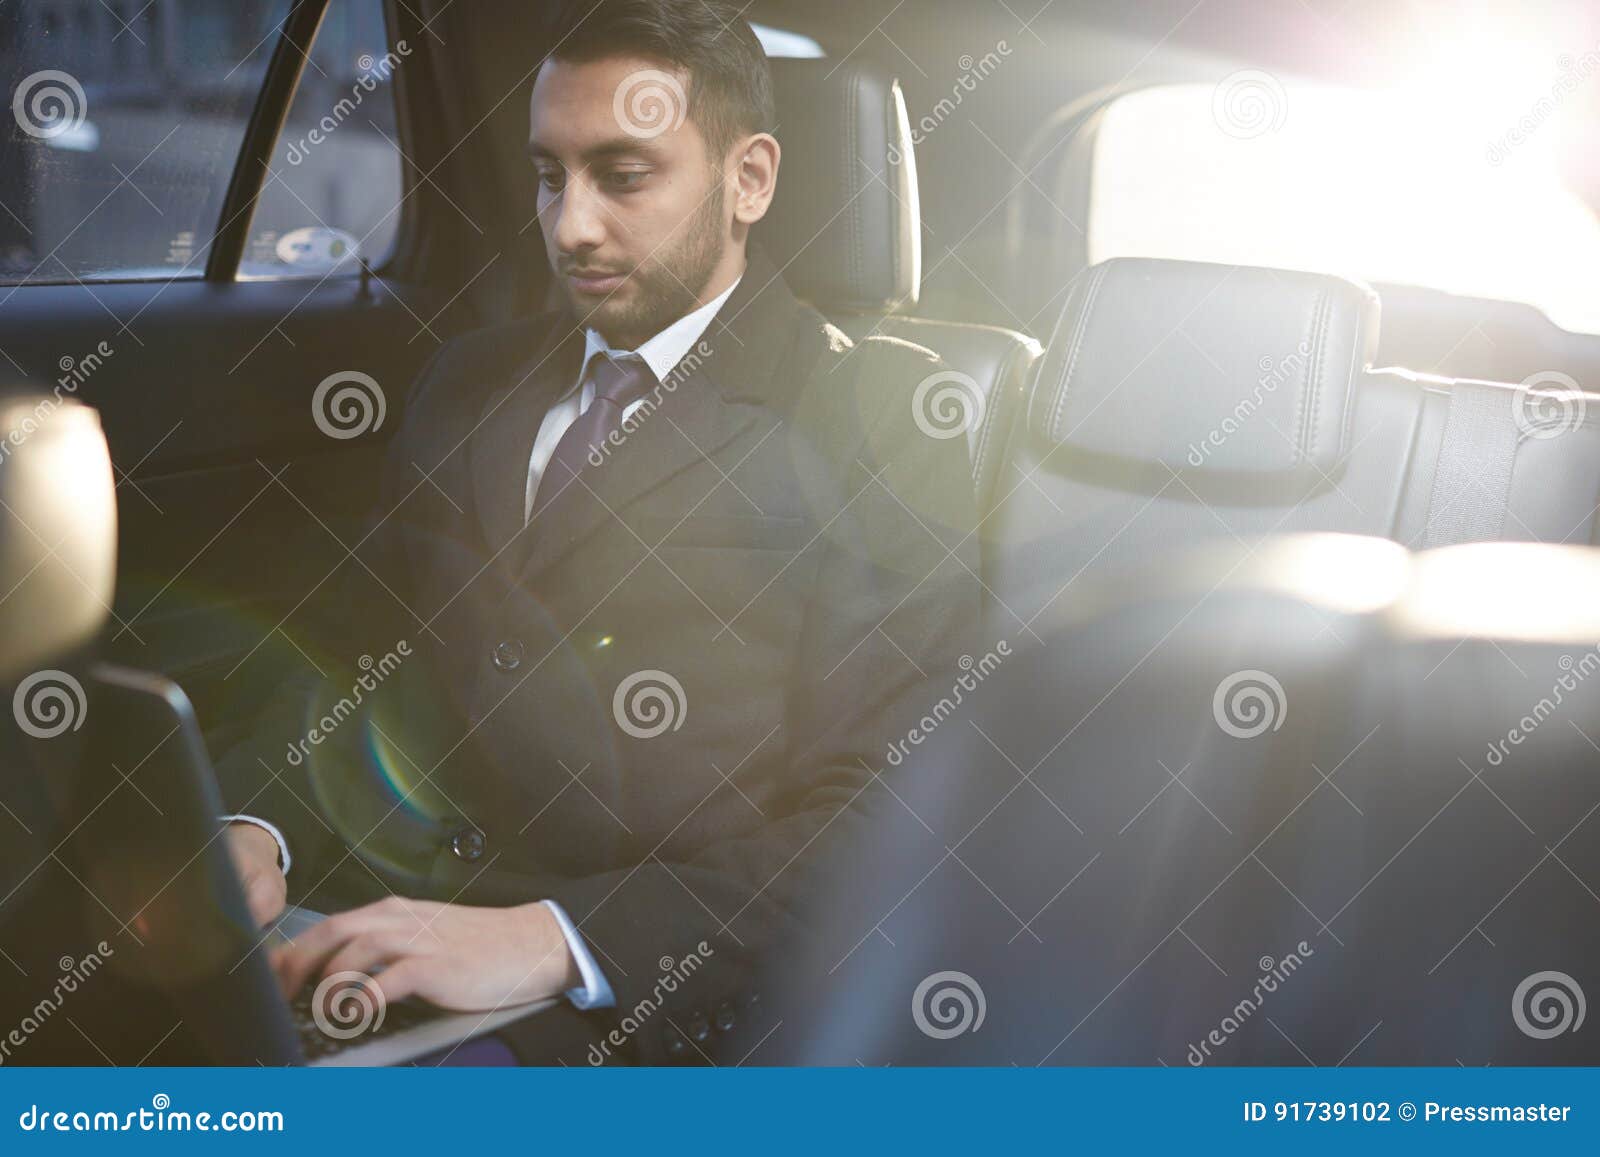 Successful Businessman in Backseat of Car Stock Photo - Image of riding